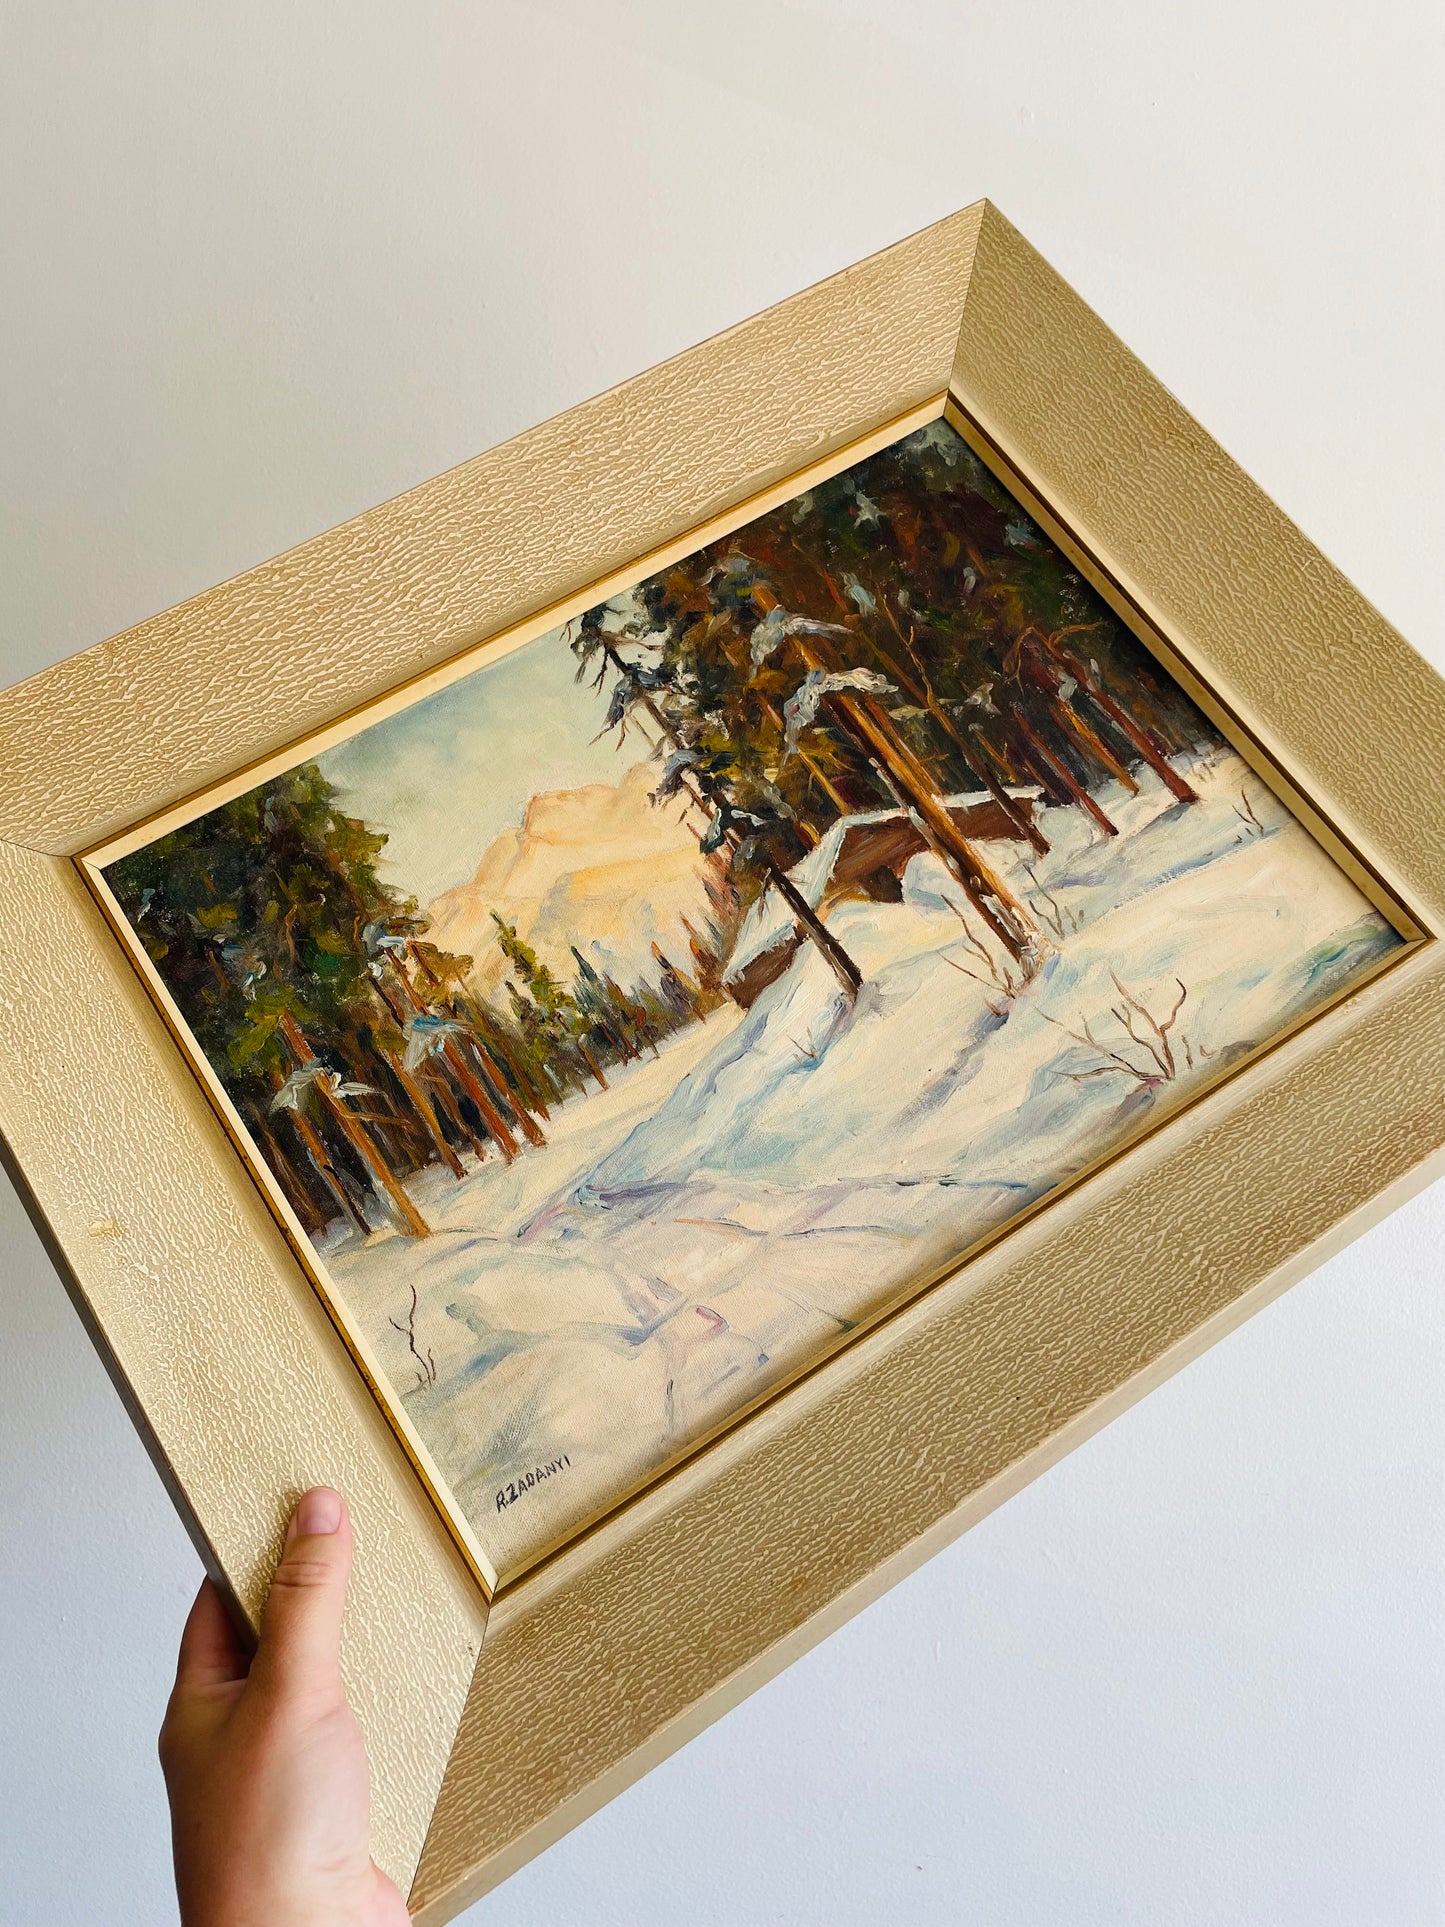 Original Art - Large Framed Painting of Snowy Cabin in Woods with Mountains - Signed R. Zadanyi